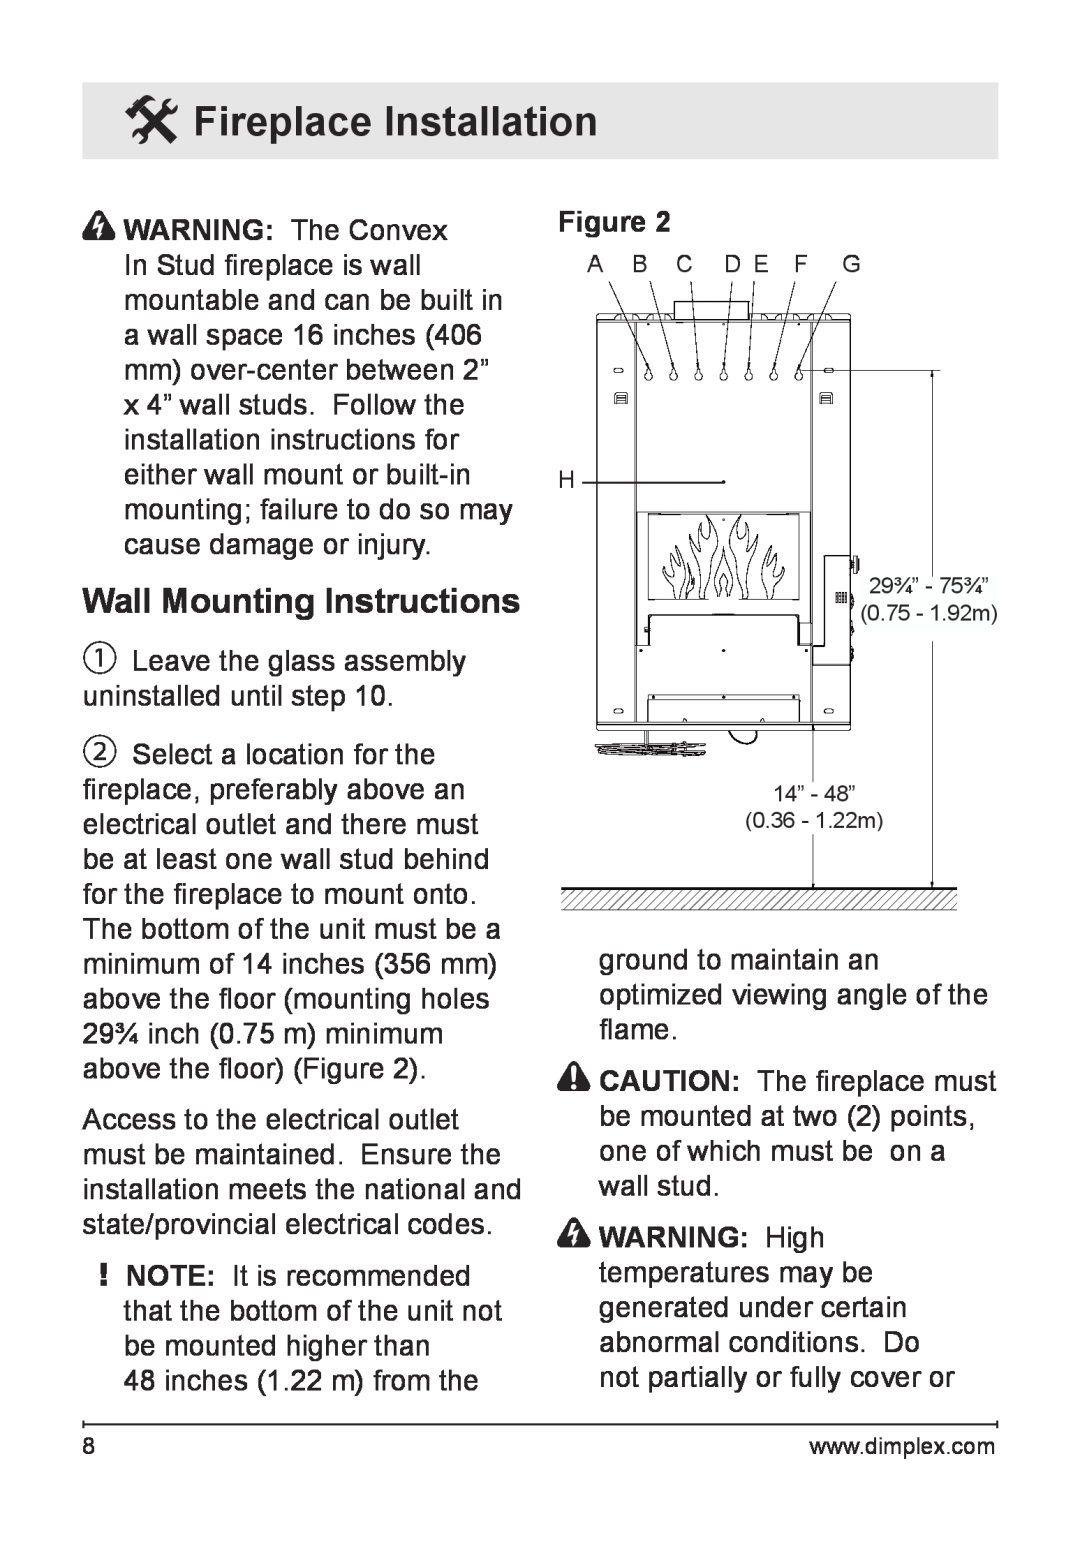 Dimplex VCX1525-WH owner manual Wall Mounting Instructions, Fireplace Installation 